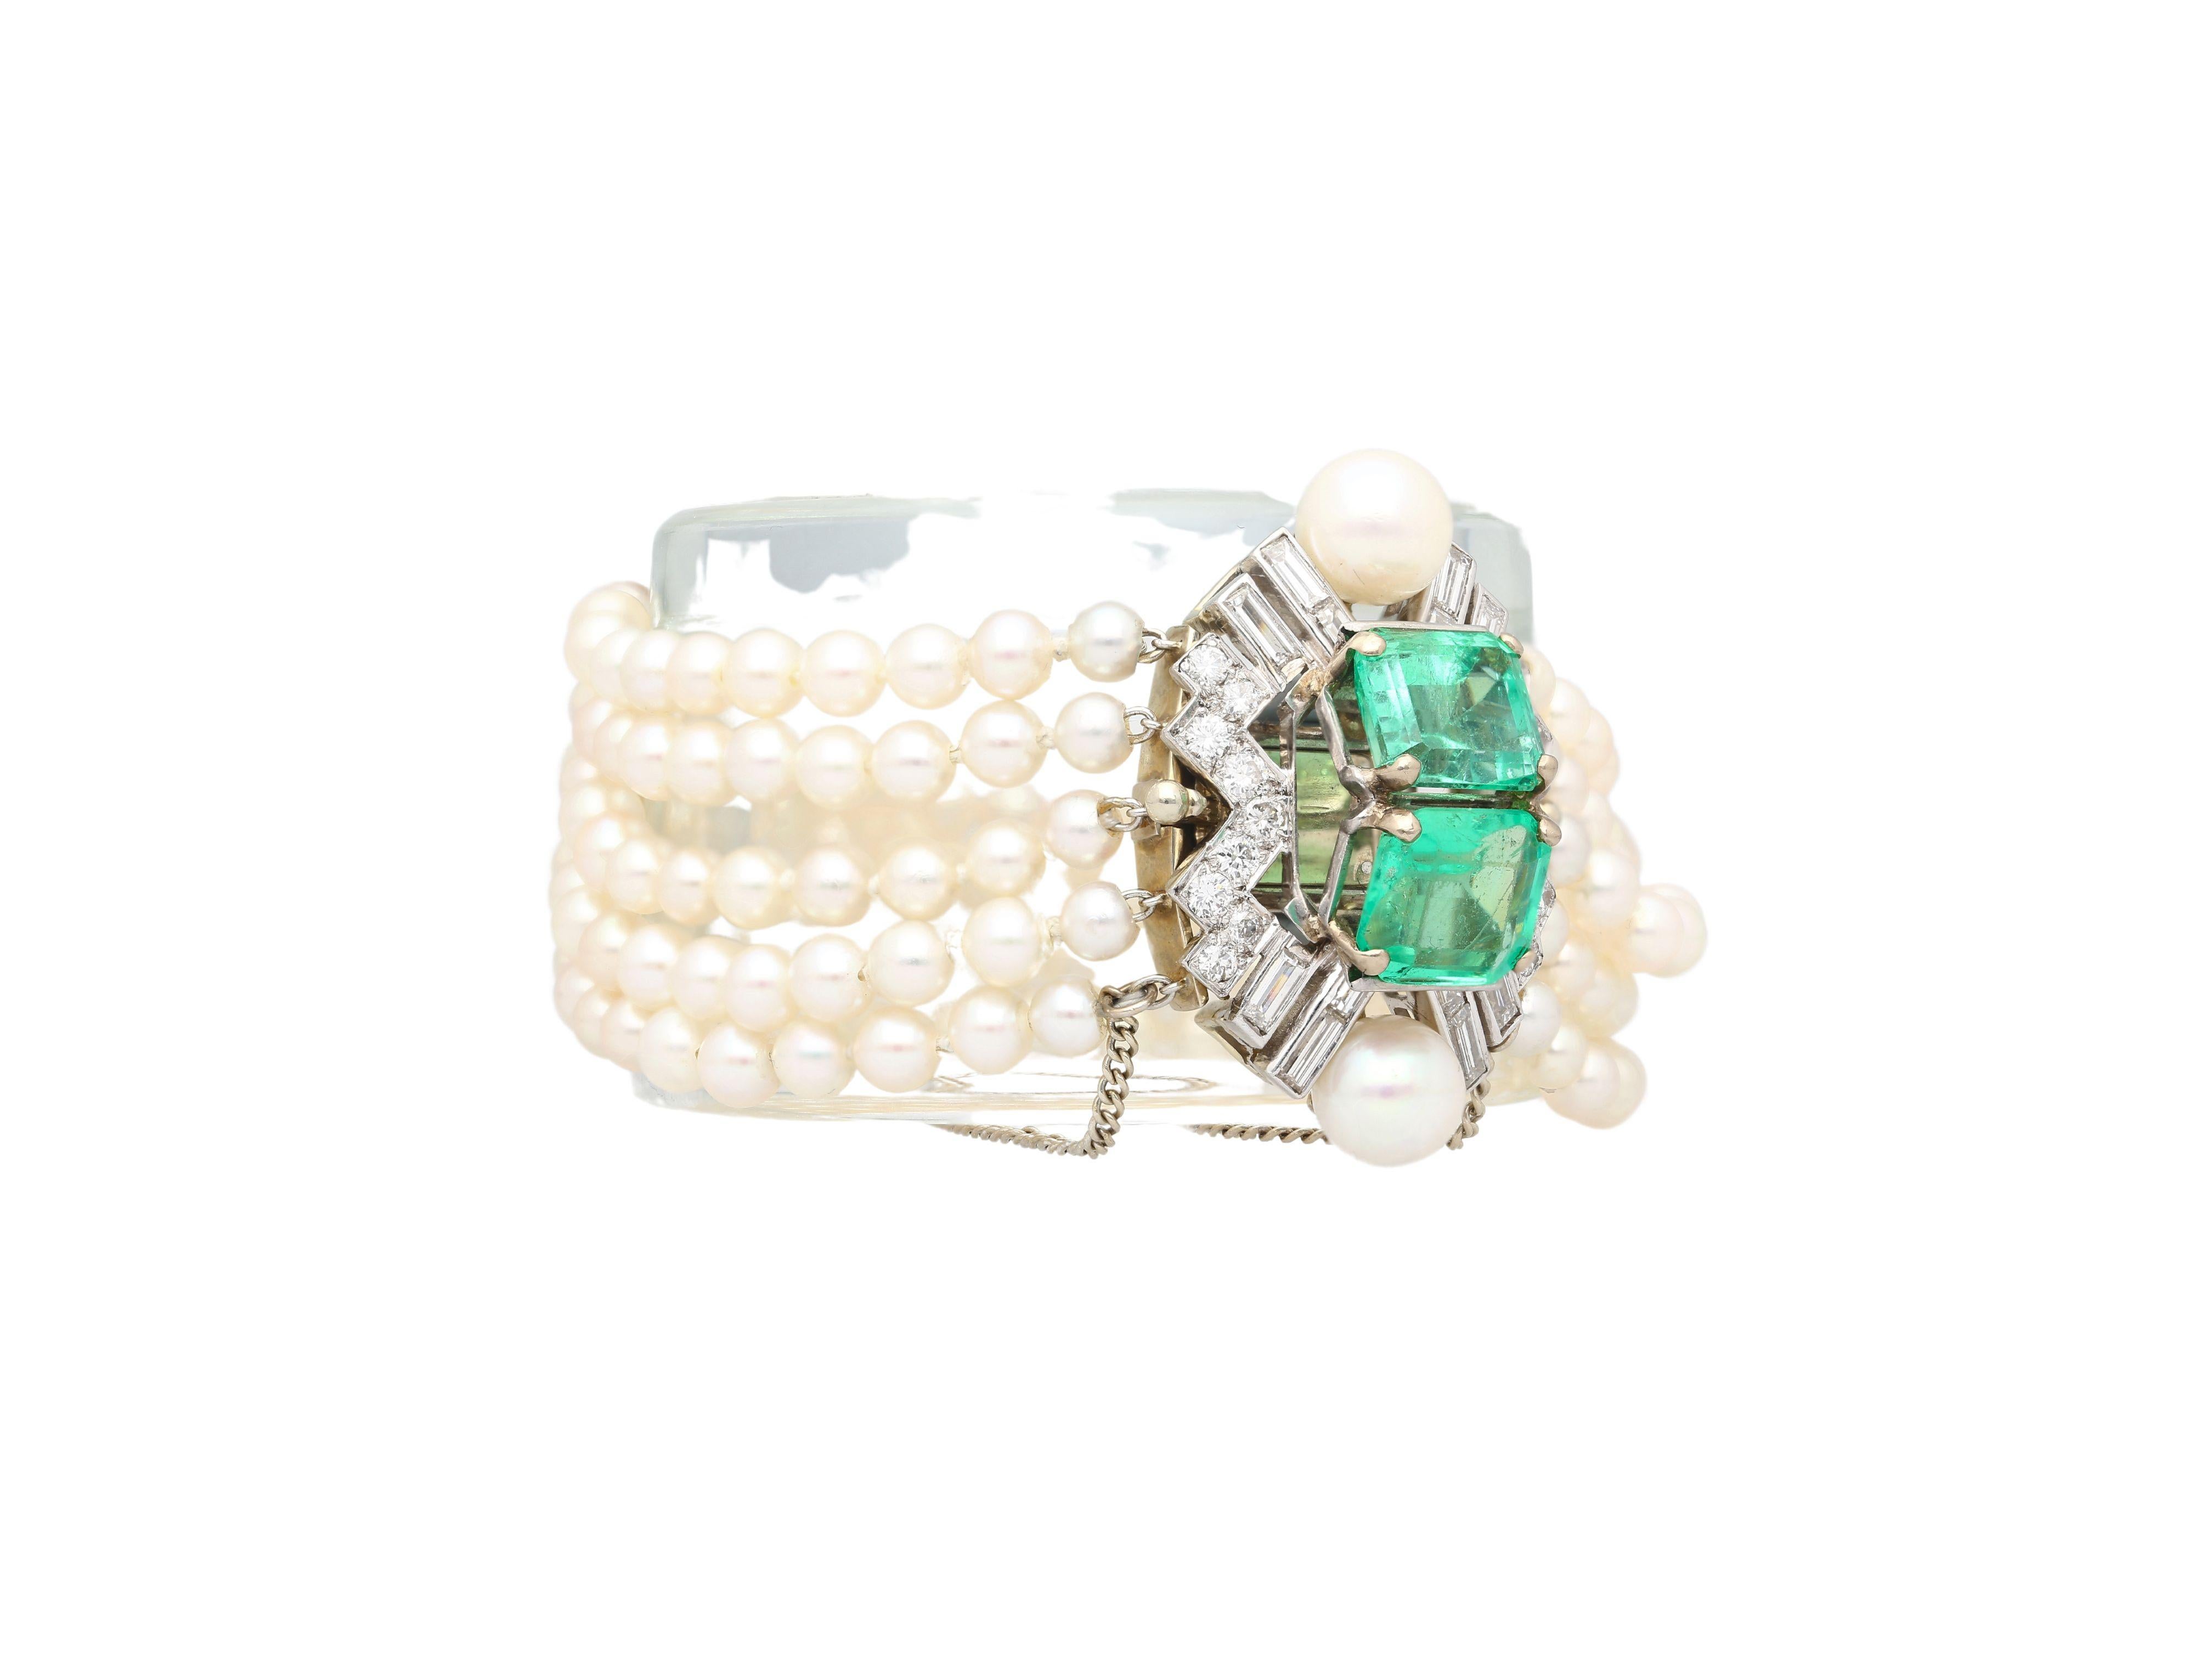 Women's Art Deco Platinum 5-Row Pearl Bracelet with 8 Ctw in Emeralds and Diamonds For Sale